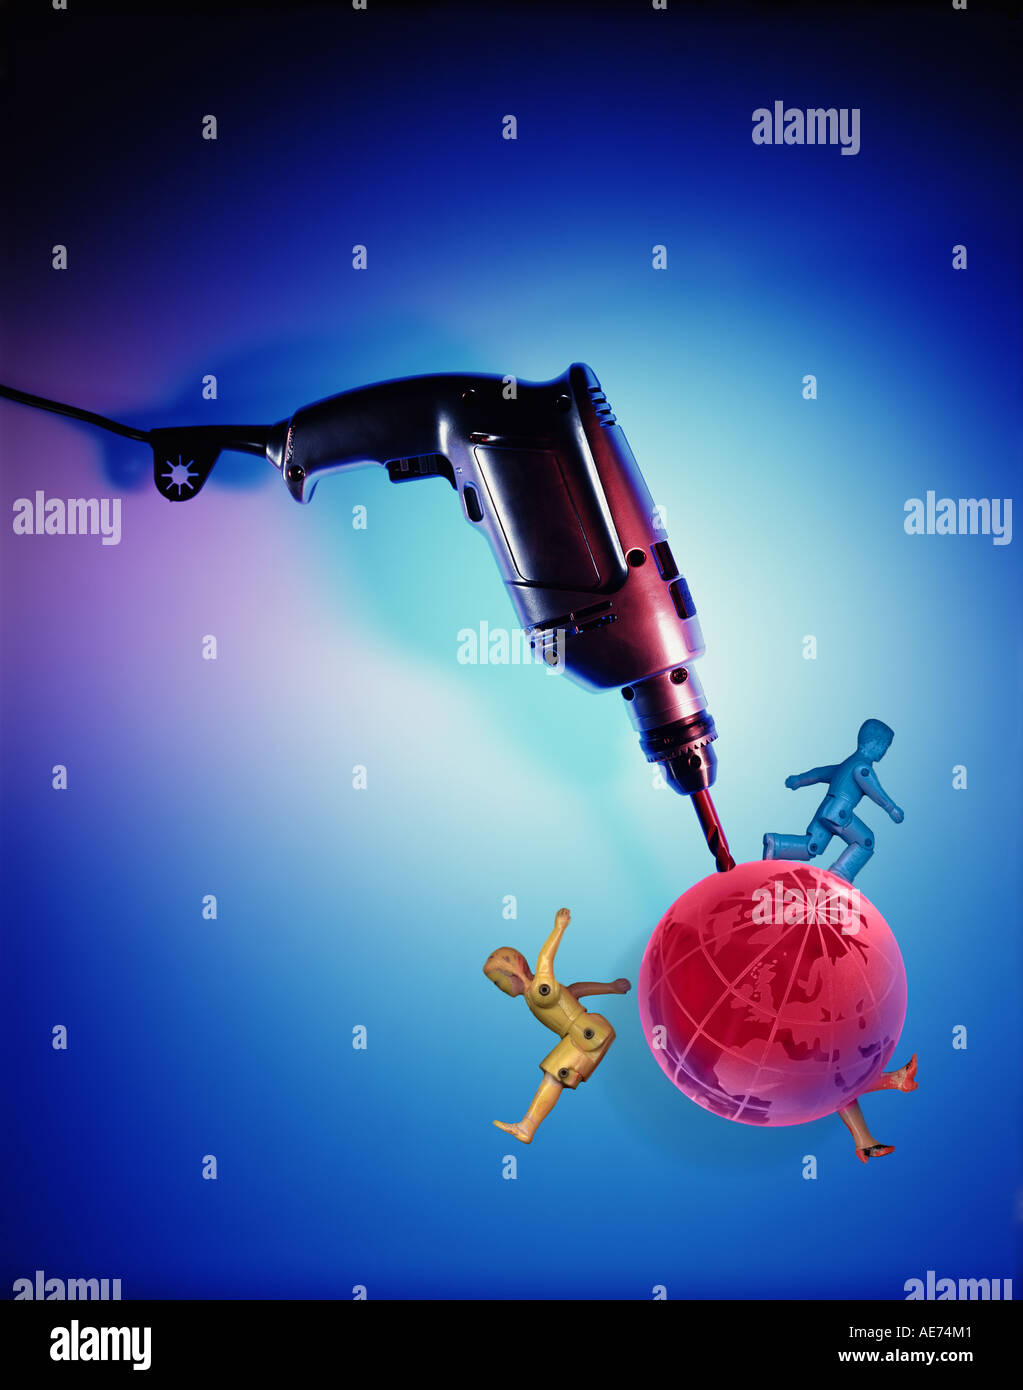 Mining the Earth. An electric power drill drilling into a transparent pink globe of the earth Stock Photo